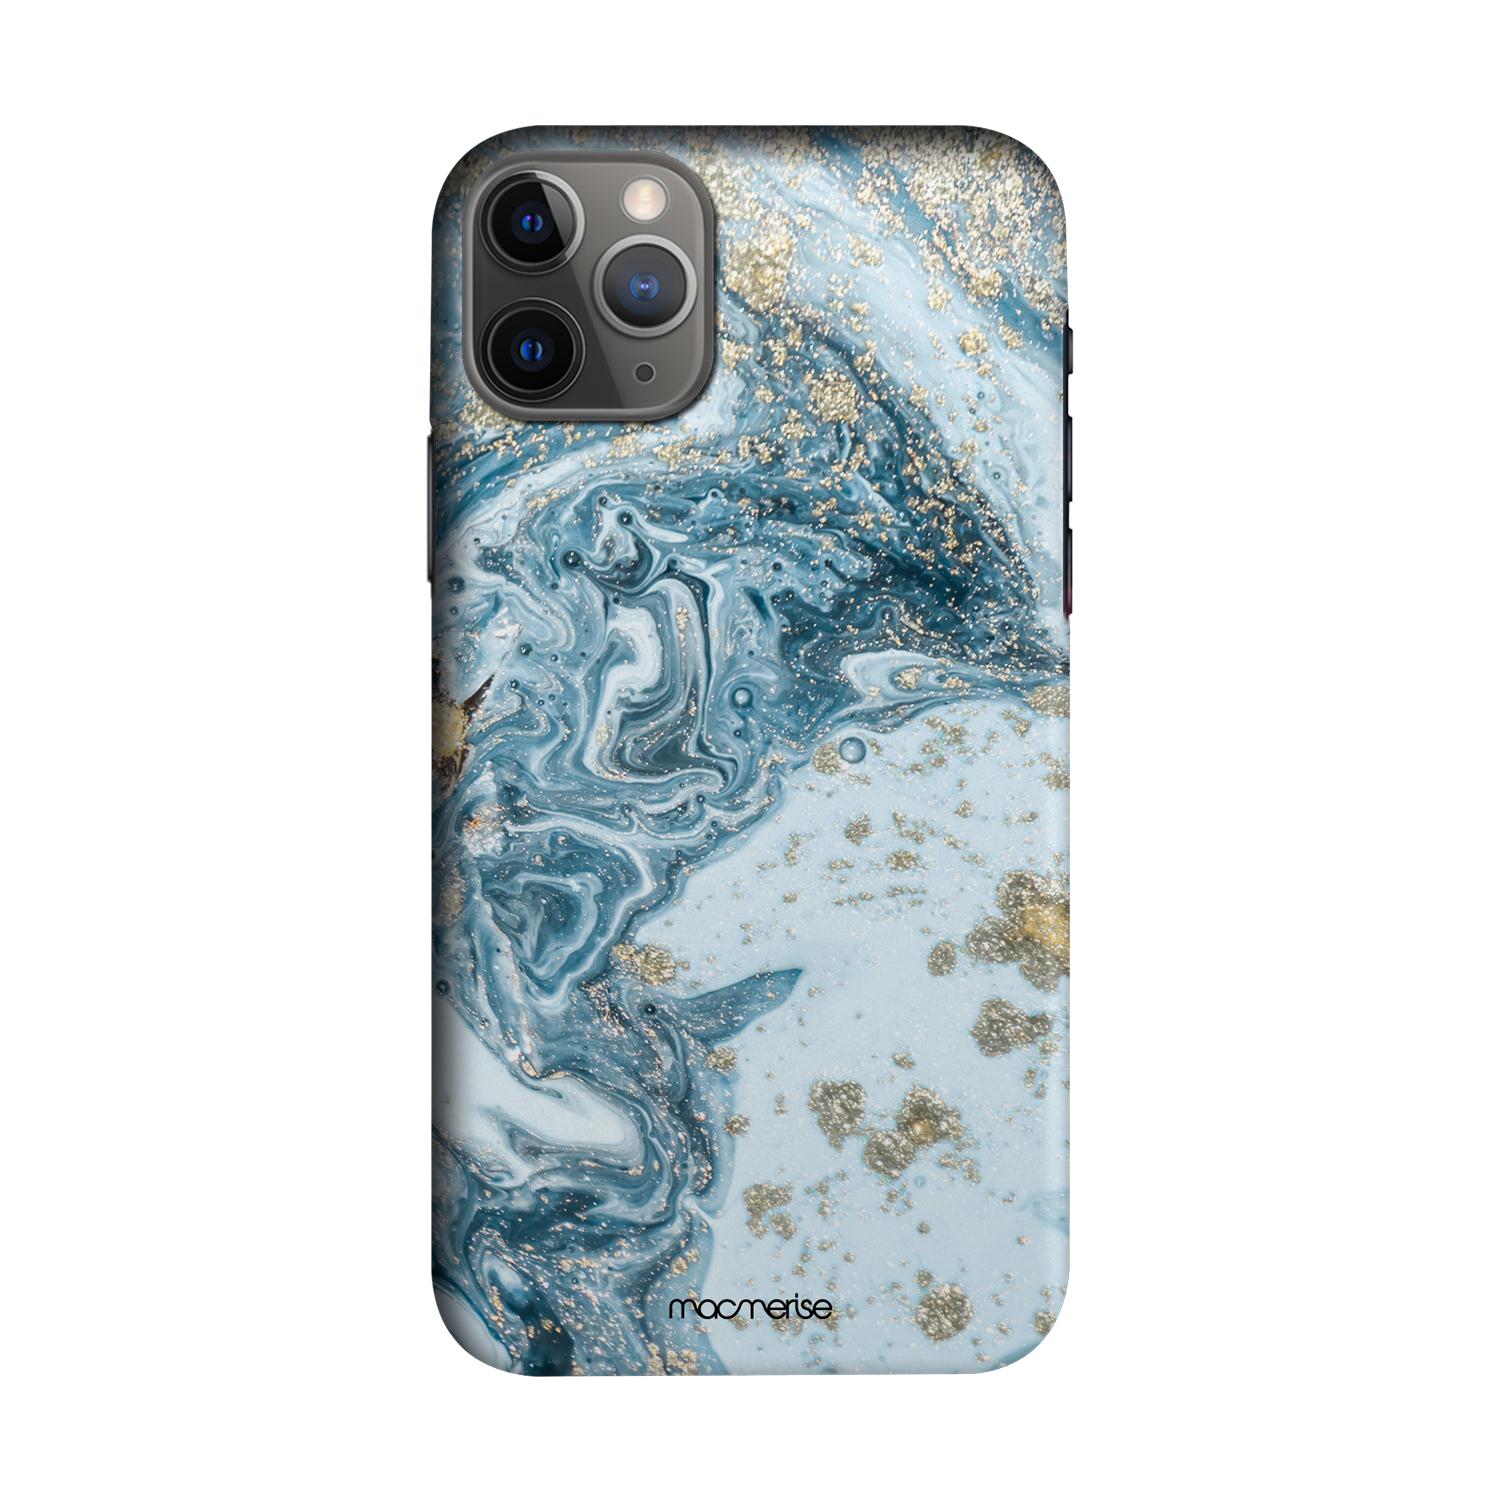 Buy Marble Blue Macubus - Sleek Phone Case for iPhone 11 Pro Max Online